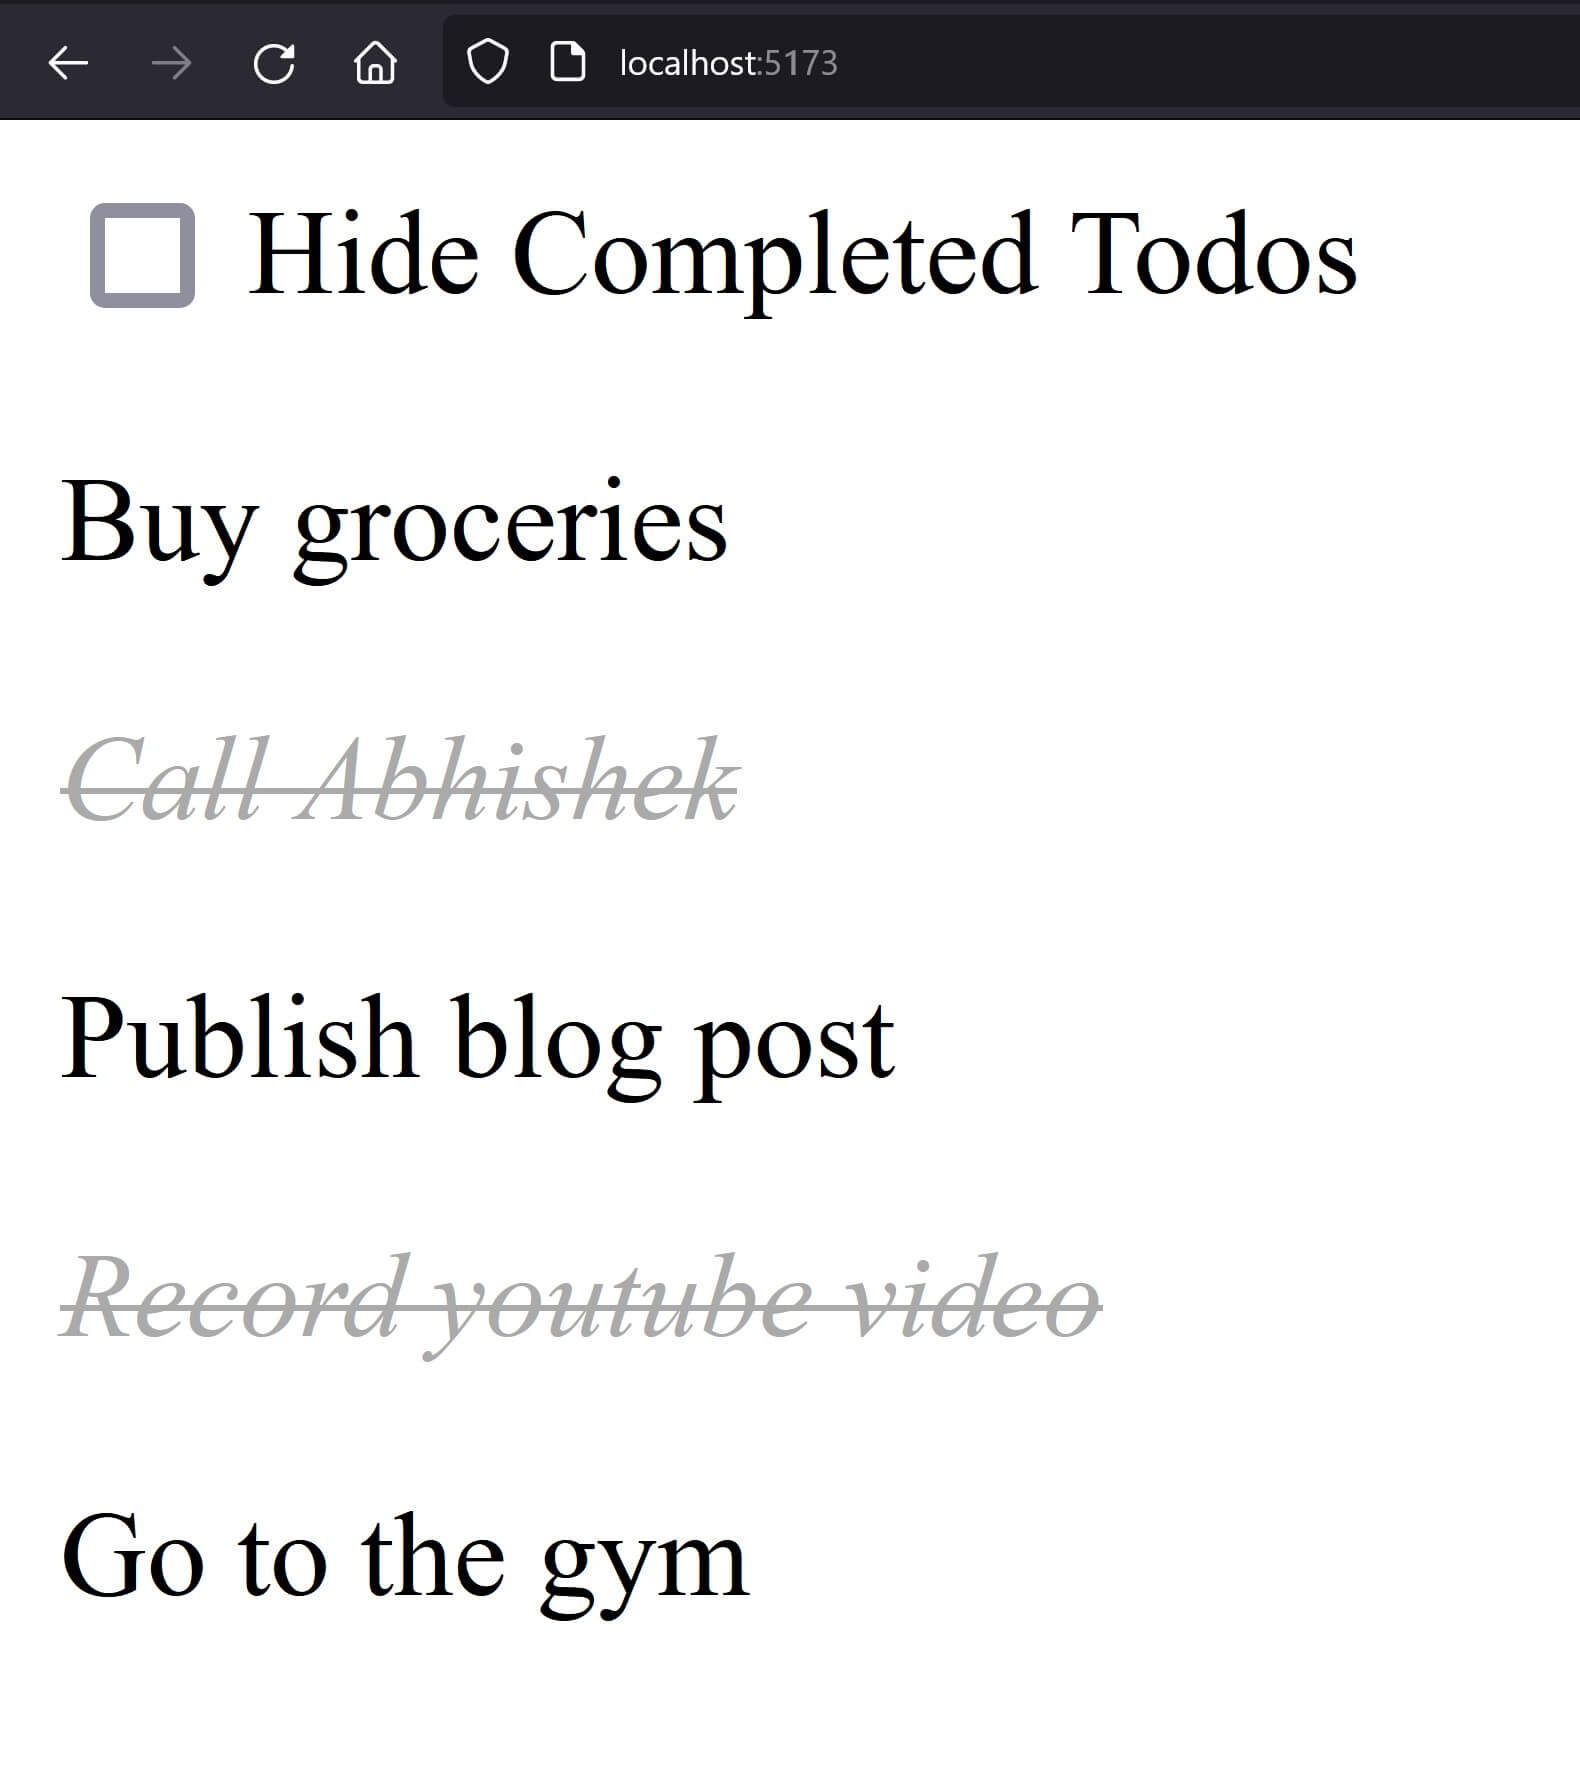 browser screenshot showing a list of todos and a checkbox filter that hides and shows completed todos from the list.